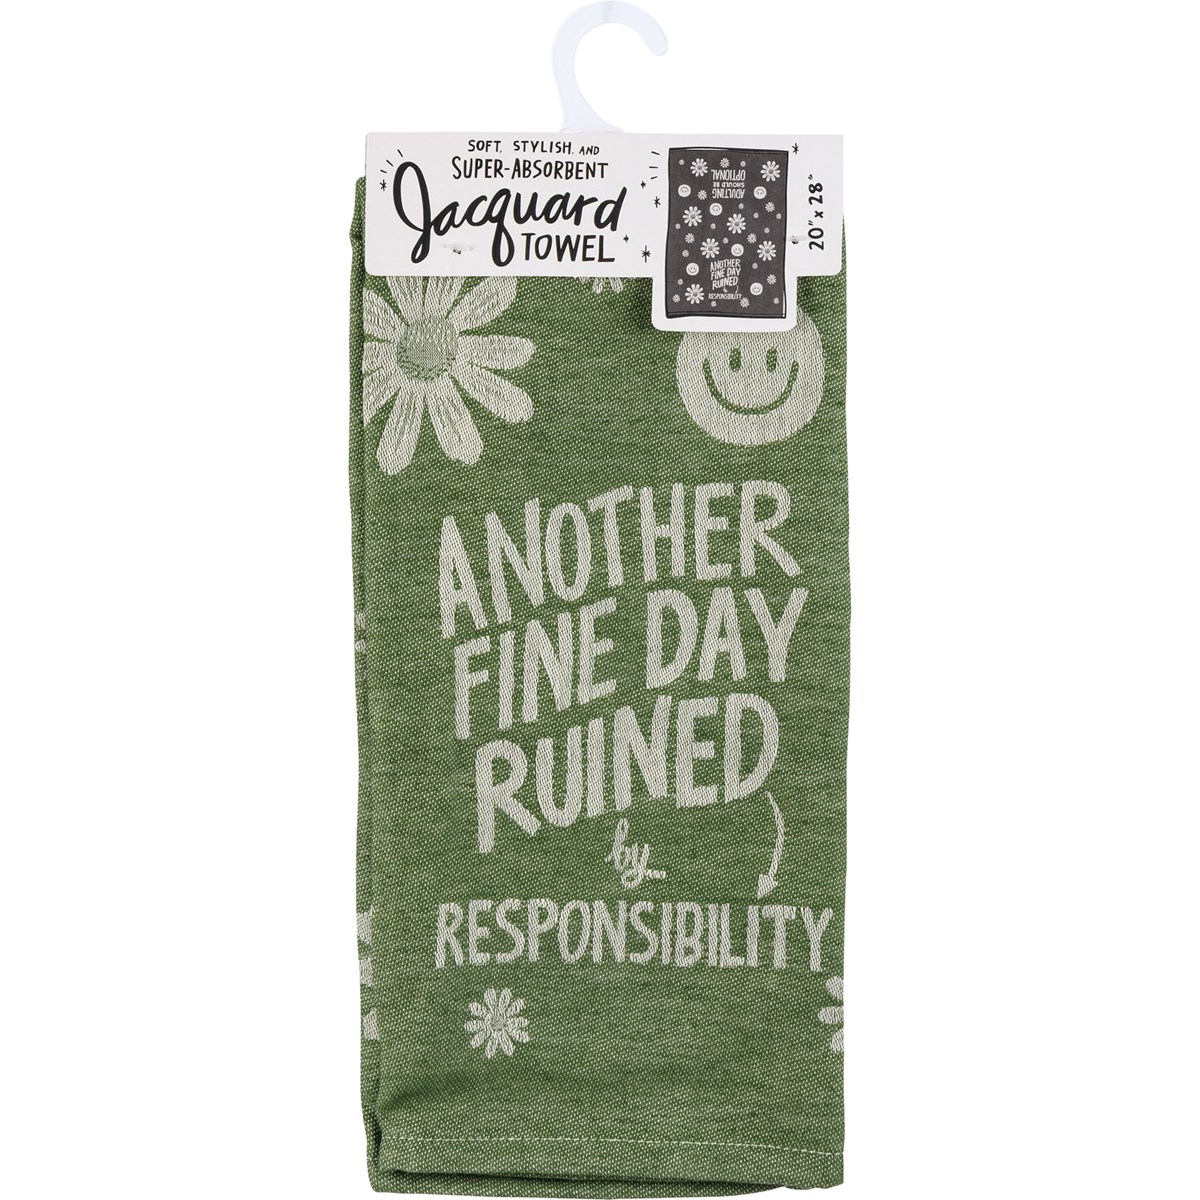 Fine Day Ruined By Responsibility Kitchen Towel - Cotton